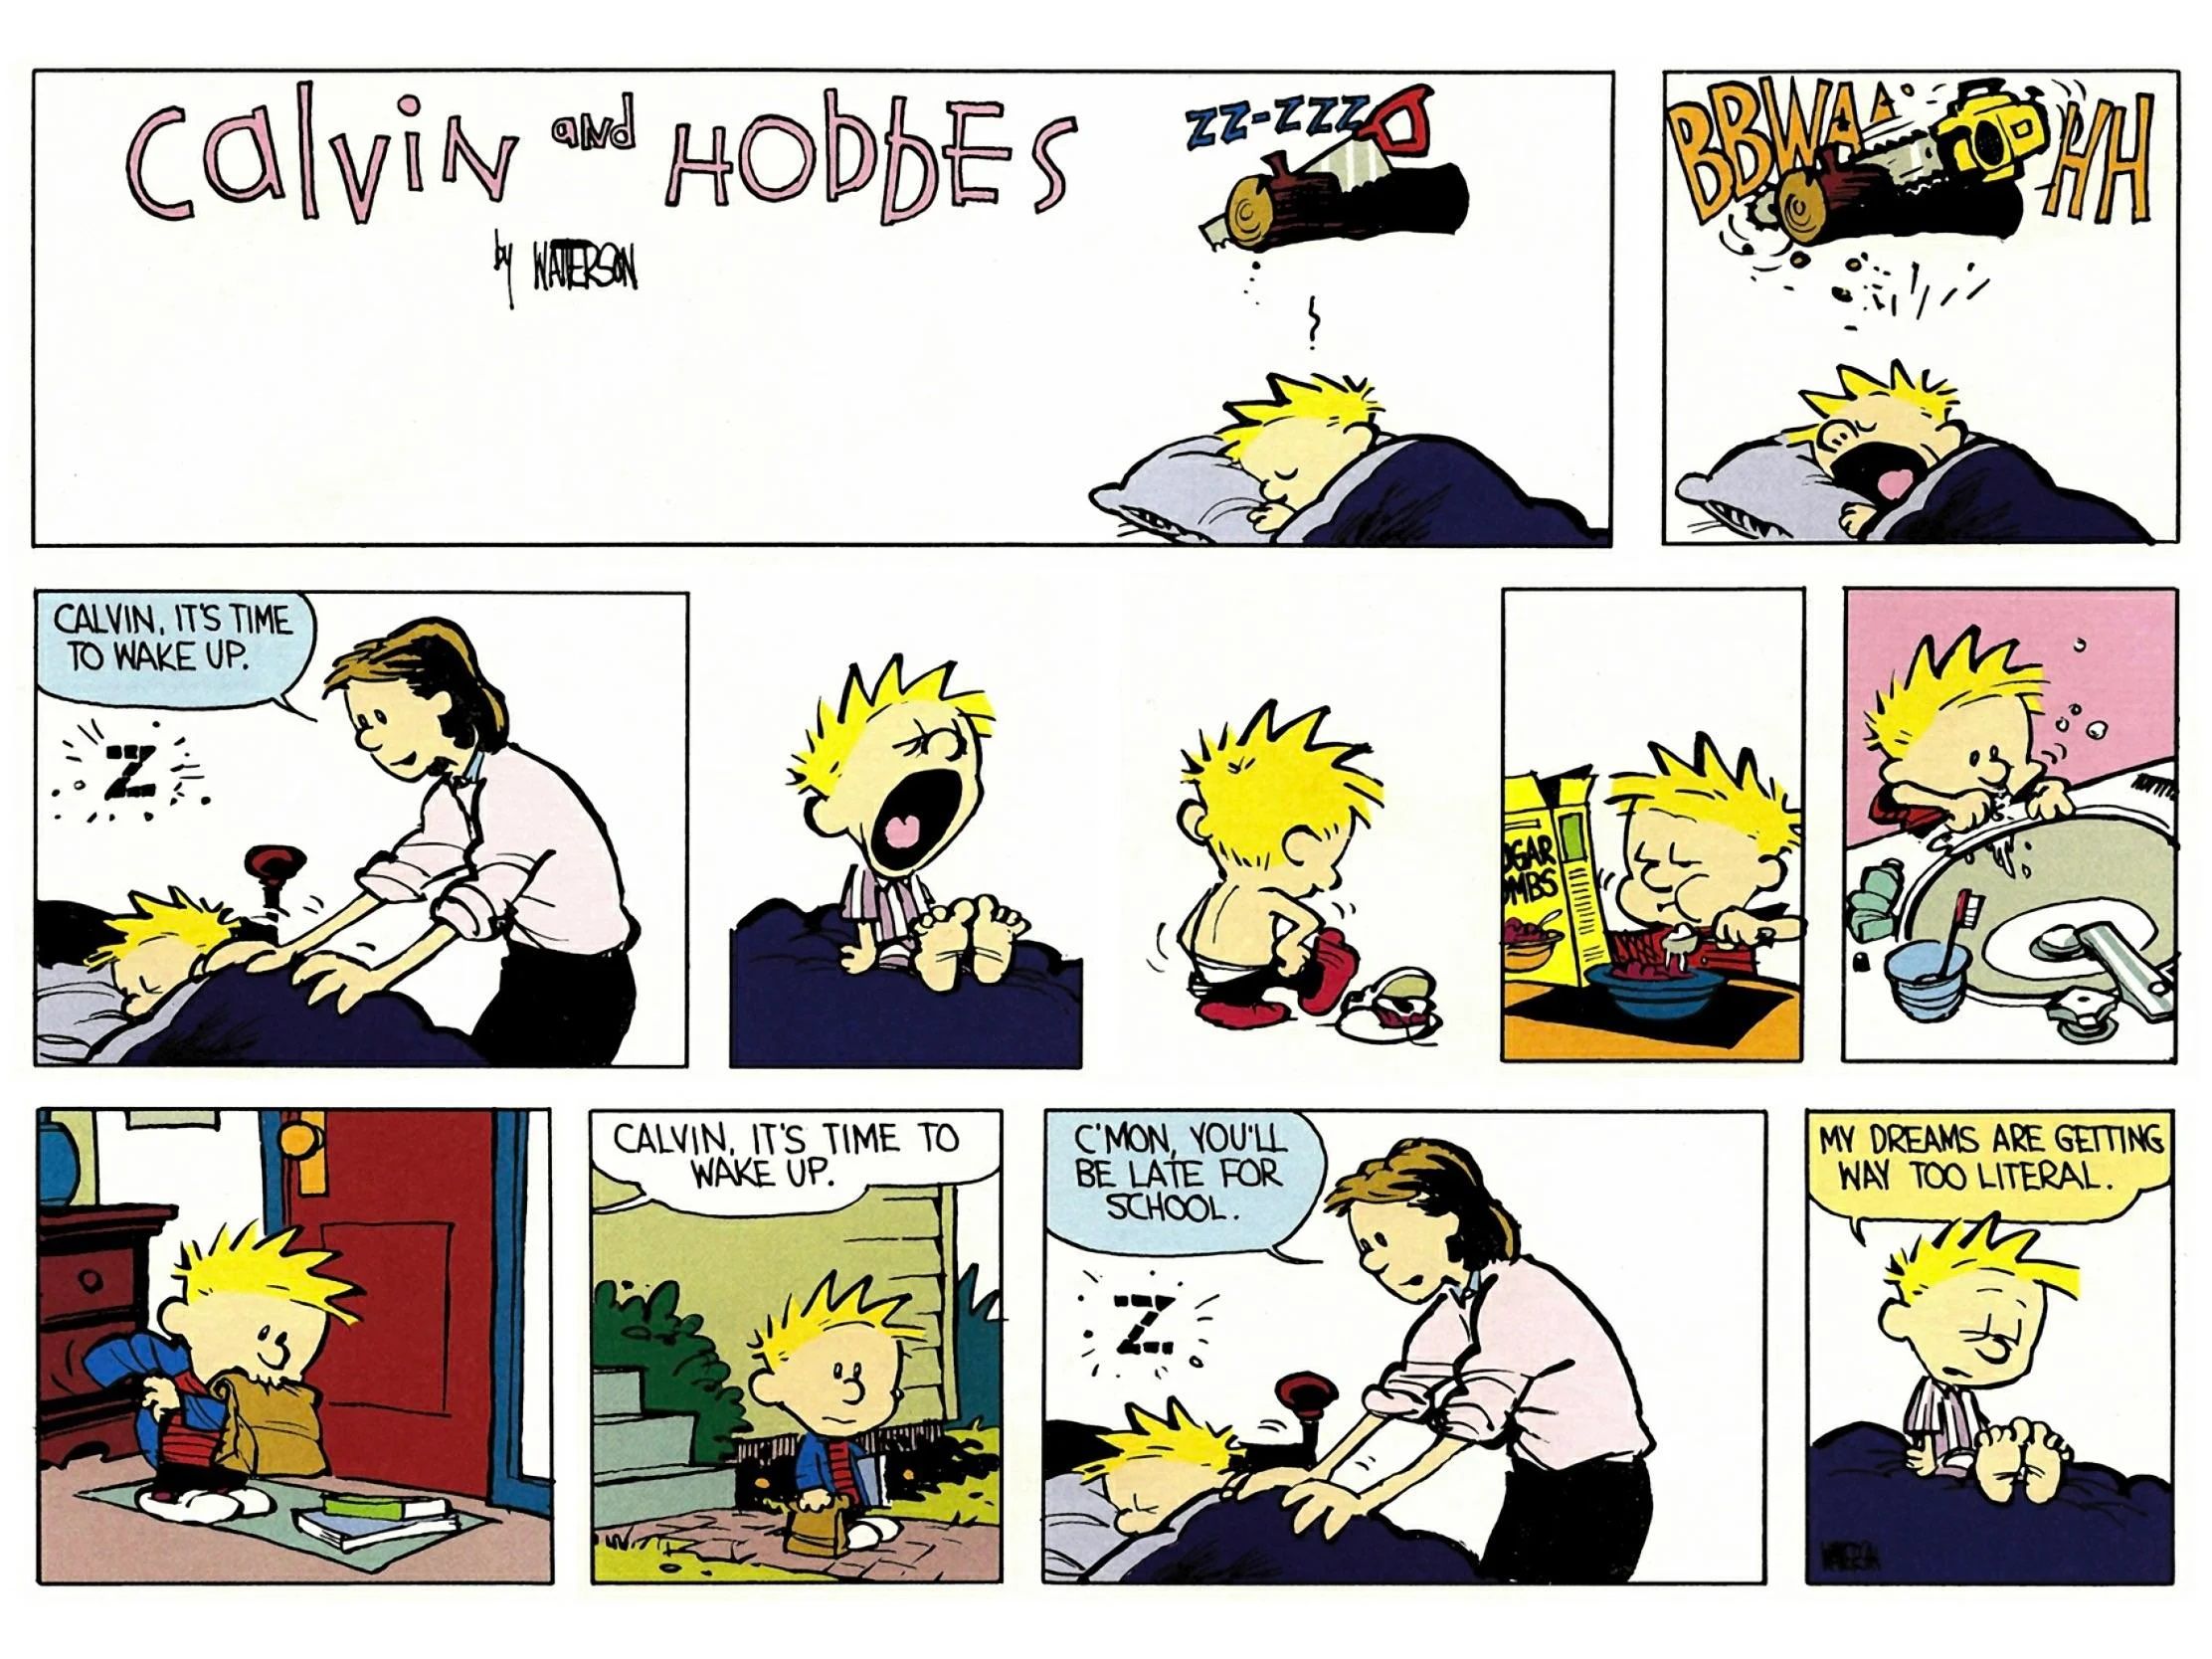 Calvin and hobbes sundat strip, Calvin dresses for school but in the last panel it is all revealed to be a dream.